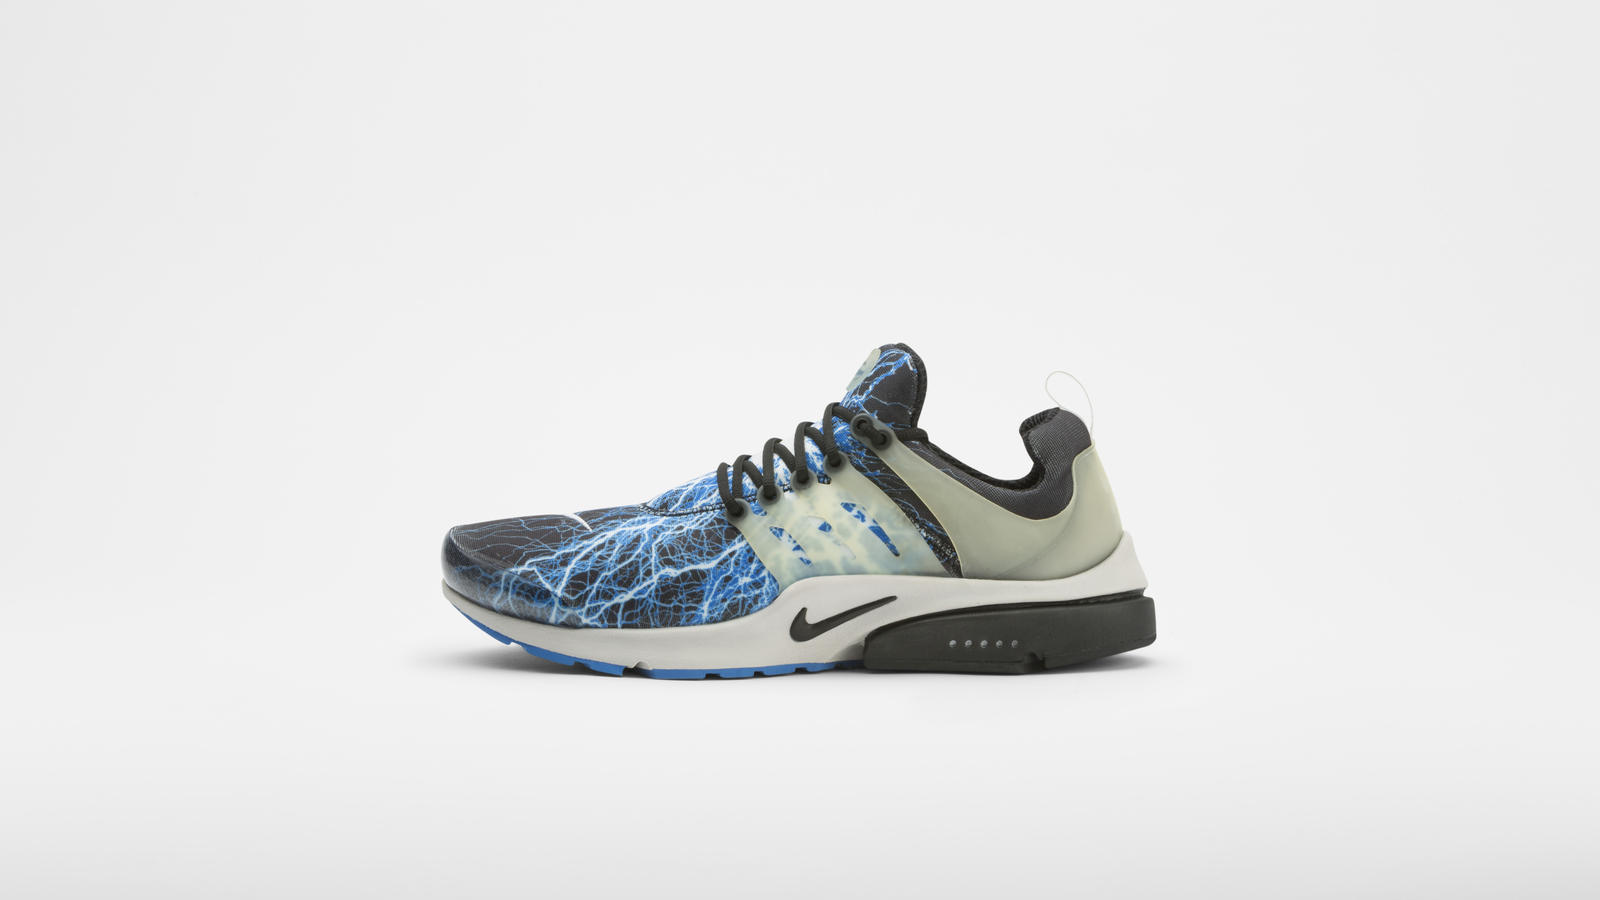 http://www.houyhnhnm.jp/news/images/NIKE_AIR_PRESTO_TROUBLE_AT_HOME_hd_1600.jpg